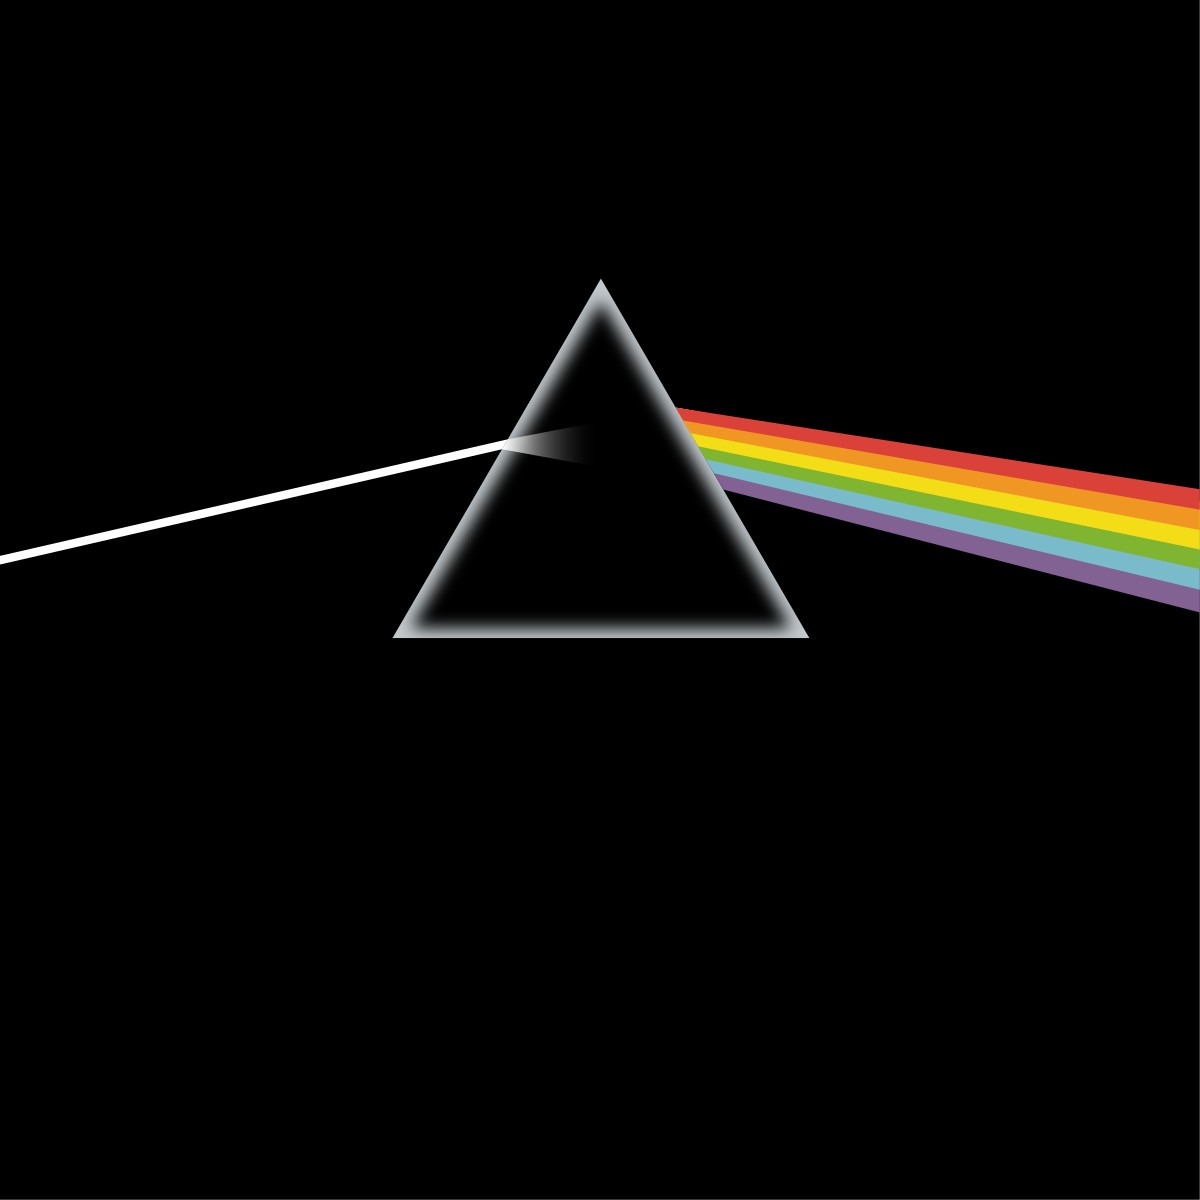 Dark Side Of The Moon by Pink Floyd (July Events)